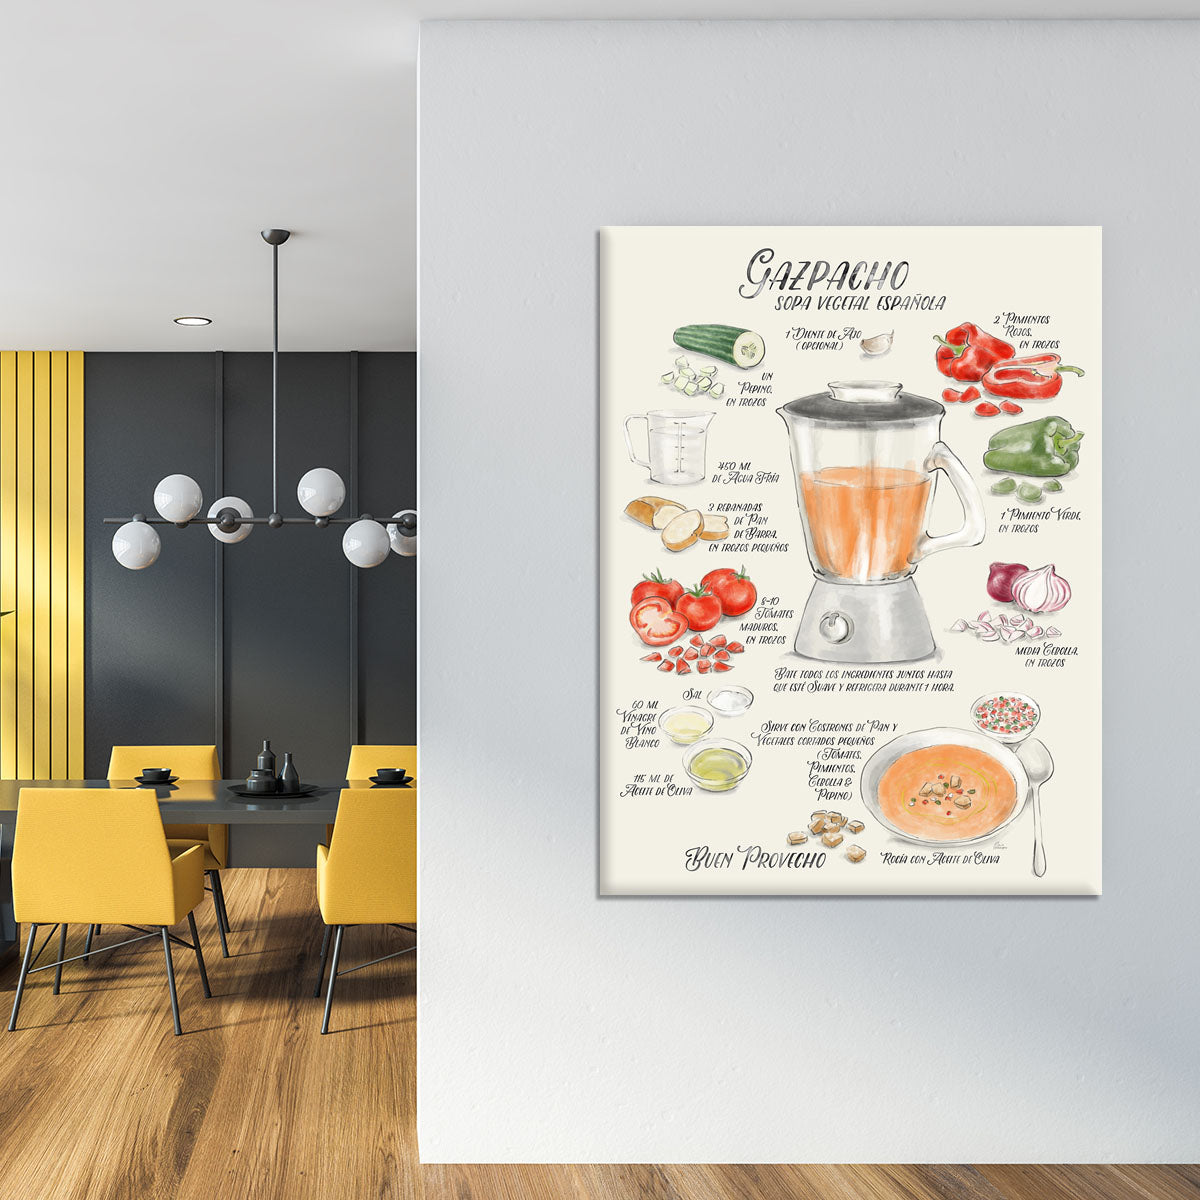 Gazpacho illustrated recipe in Spanish Canvas Print or Poster - Canvas Art Rocks - 4